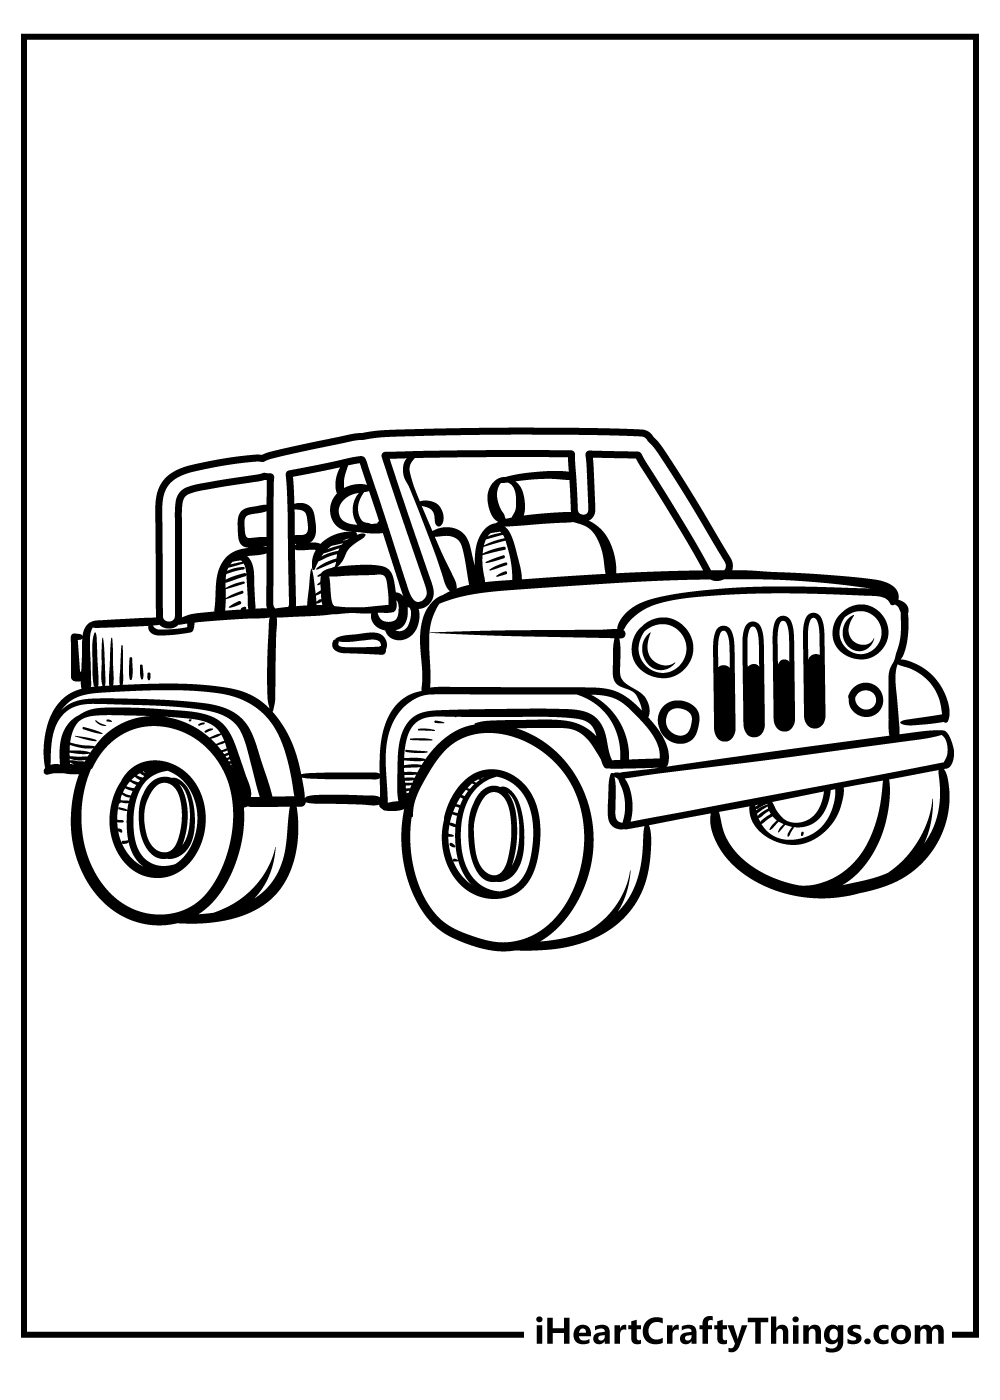 Jeep Coloring Sheet for children free download